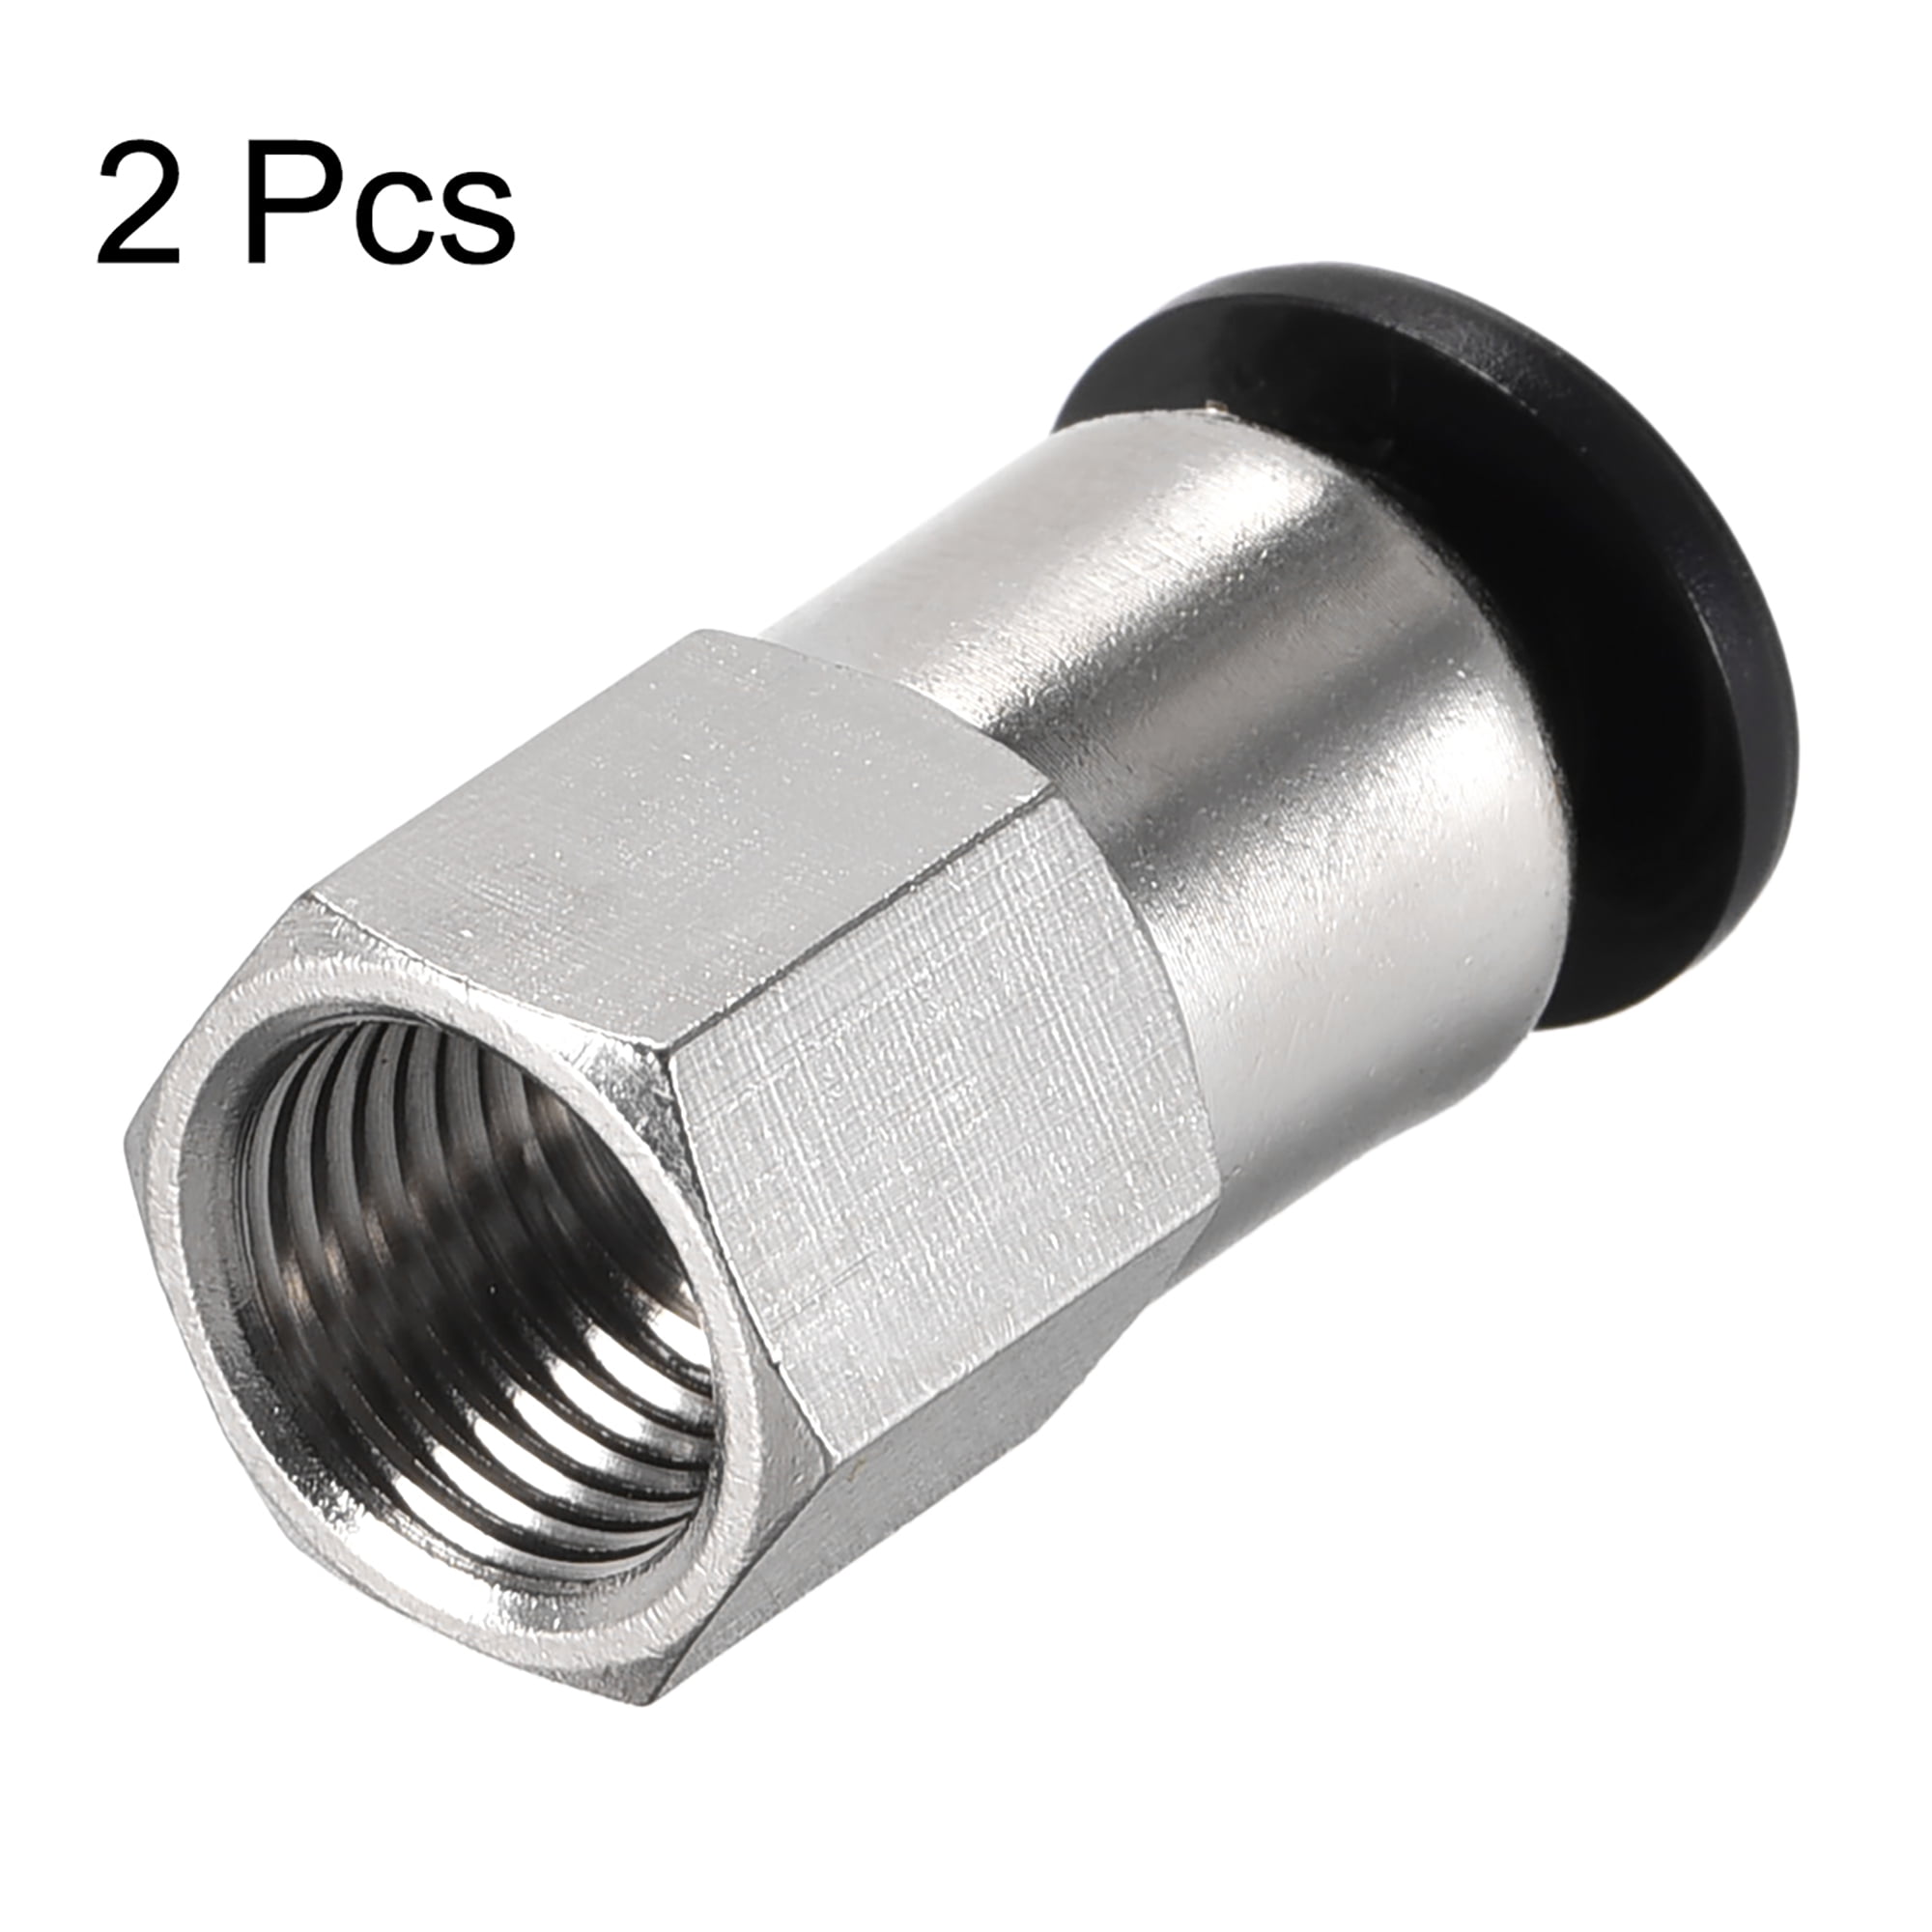 Push to Connect Tube Fitting Adapter 6mm OD x 1/8 PT Straight Connecter 2pcs 